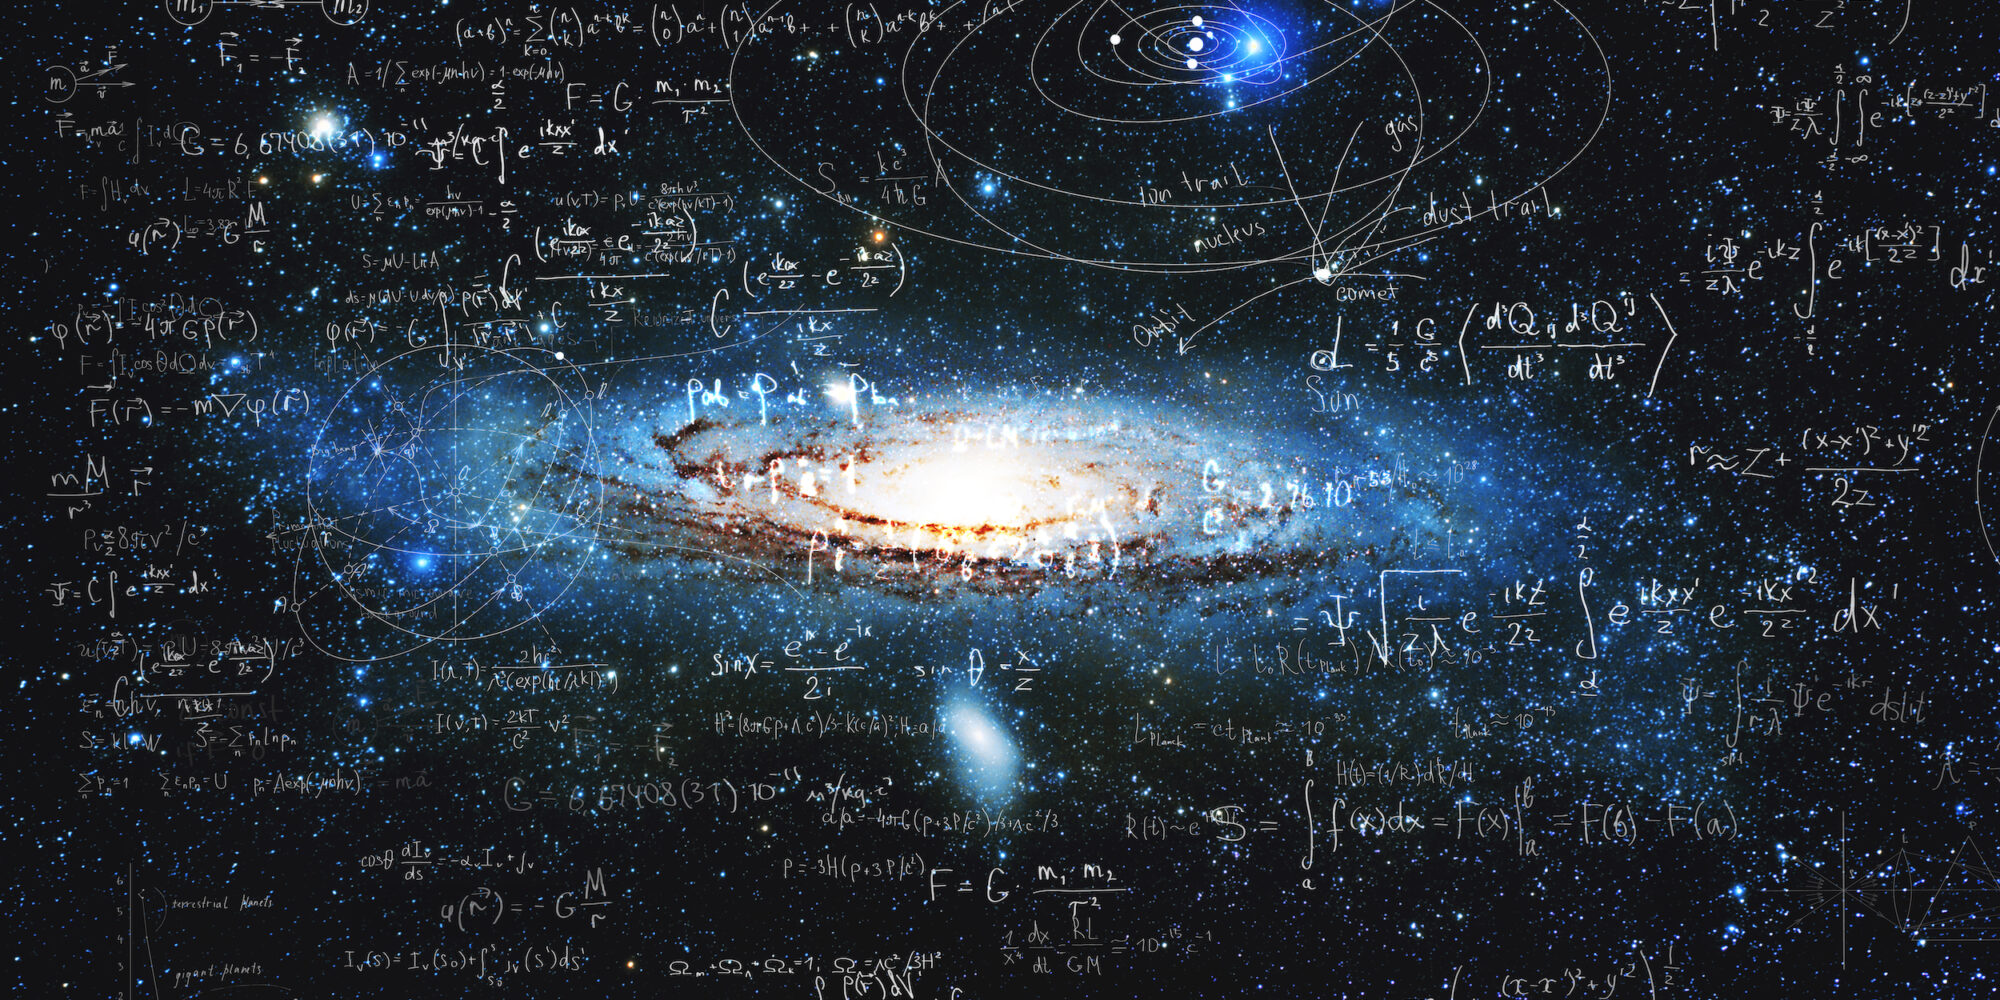 Science and research of the universe, spiral galaxy and physical formulas, concept of knowledge and education. Elements of this image furnished by NASA.